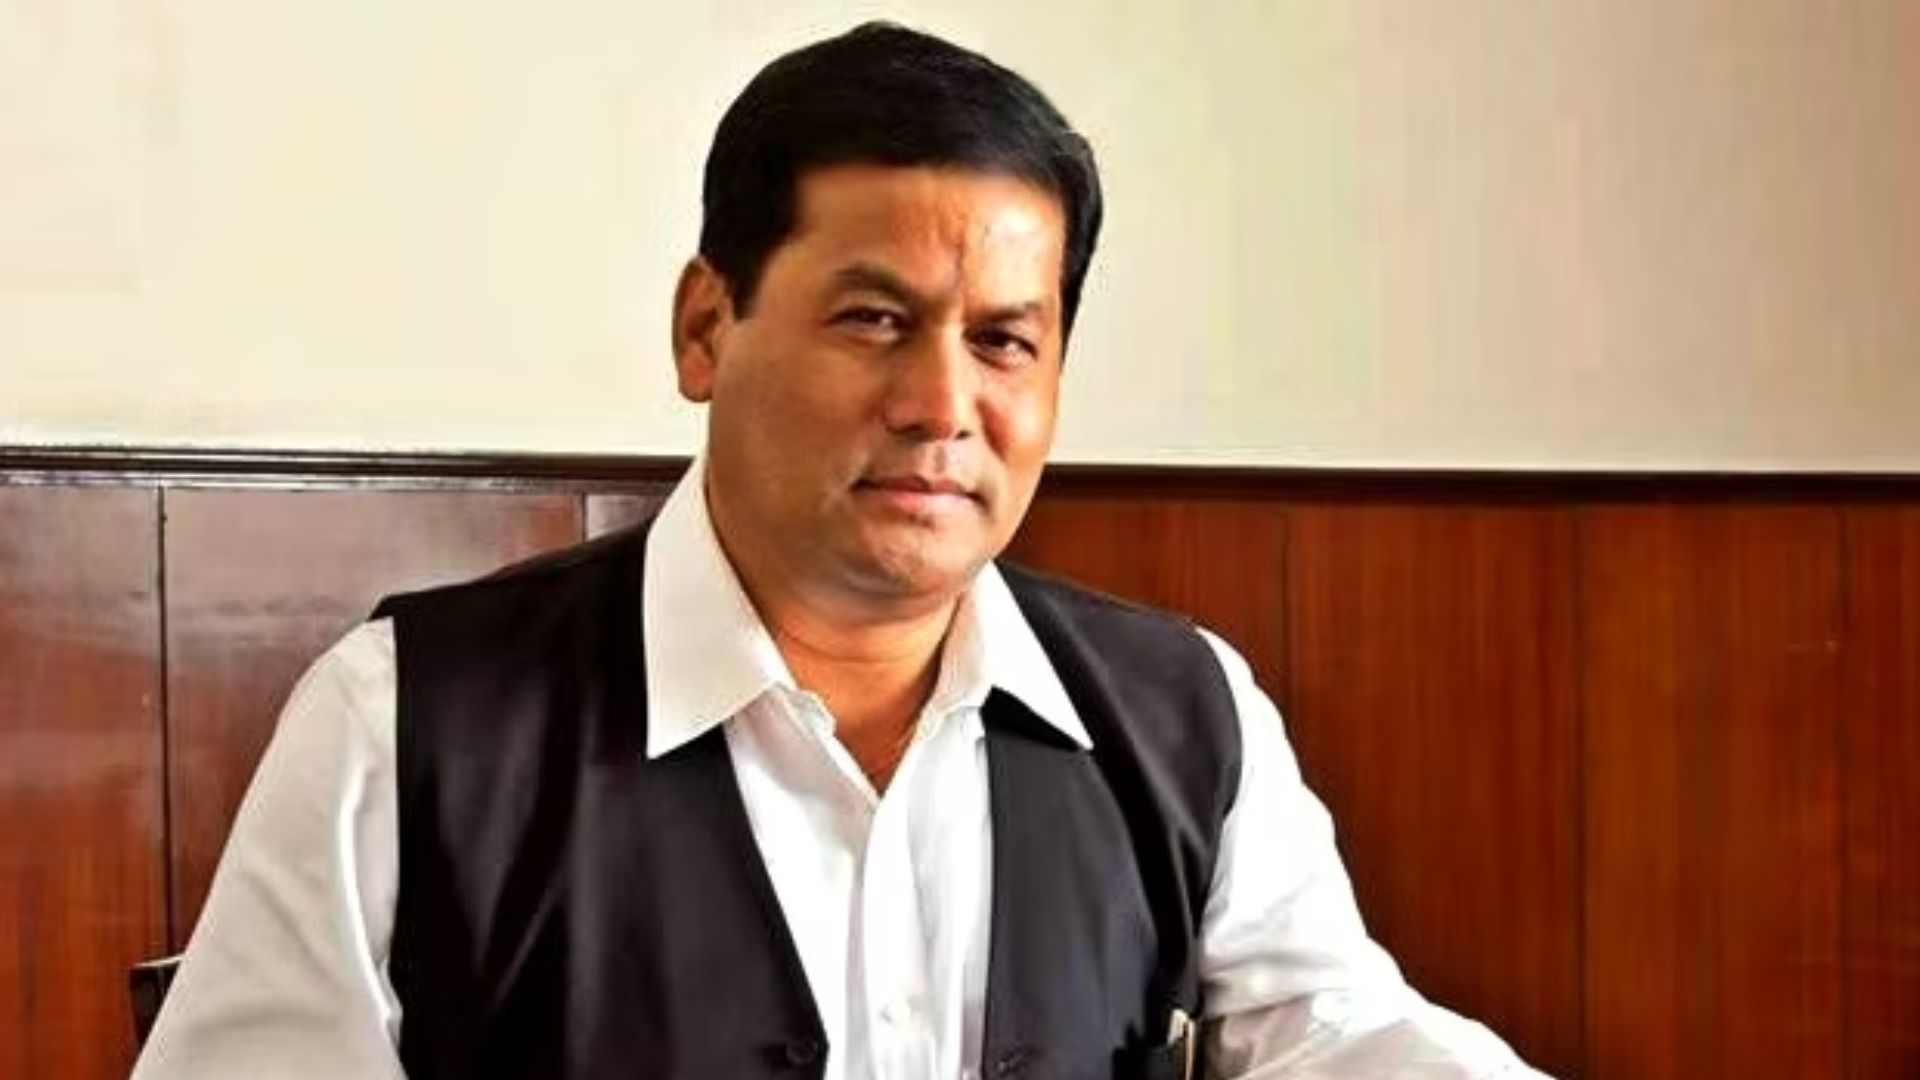 Union Minister Sarbananda Sonowal declares assets worth Rs 4.76 crore